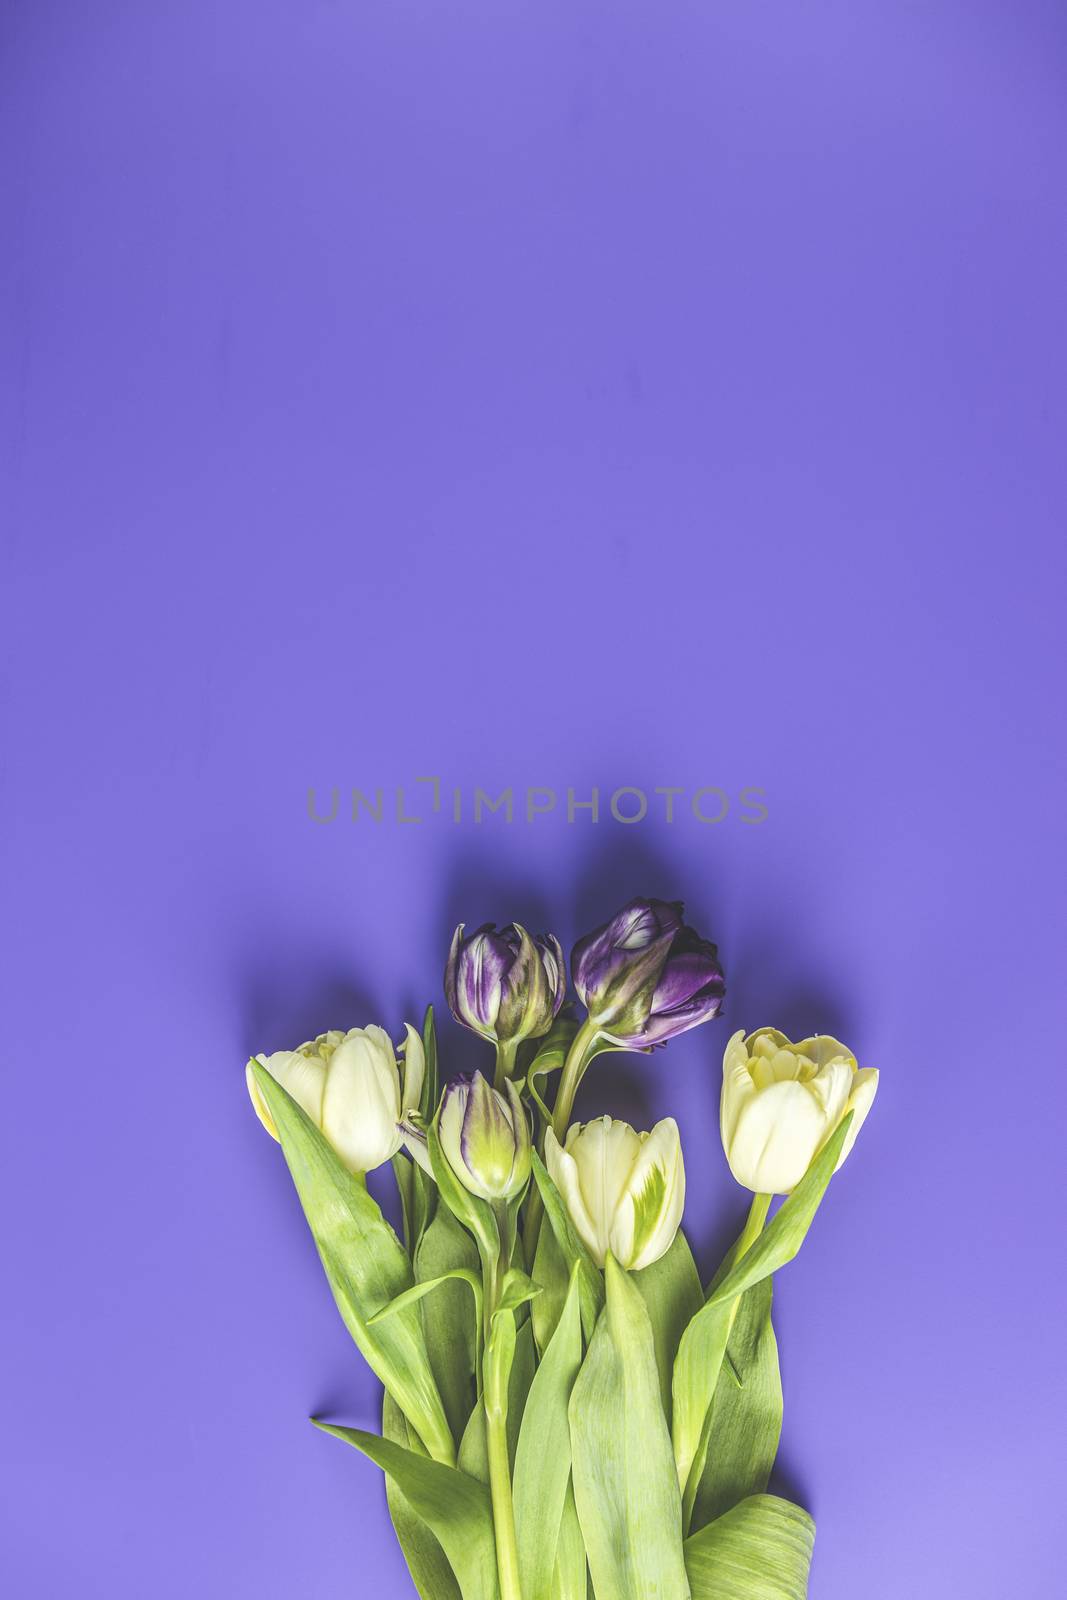 Flowers composition. Violet and light yellow tulip flowers on violet background. Valentine's day, Mother's day concept. Flat lay, top view, copy space